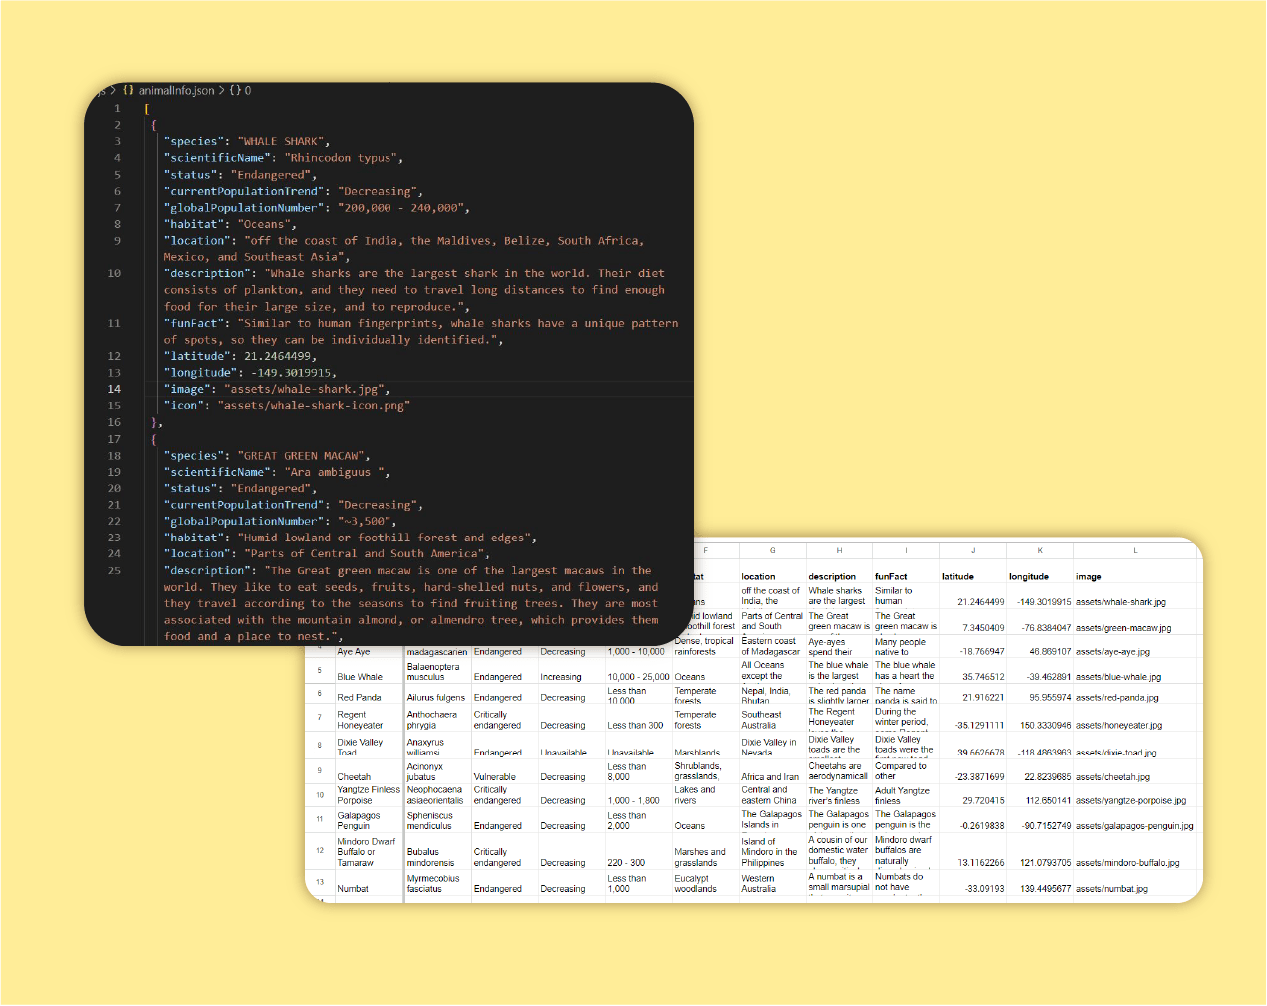 A picture including a screenshot of a JSON file shown in VS Code and a screenshot of an Excel spreadsheet. Both have information about the endangered species selected for the web app.